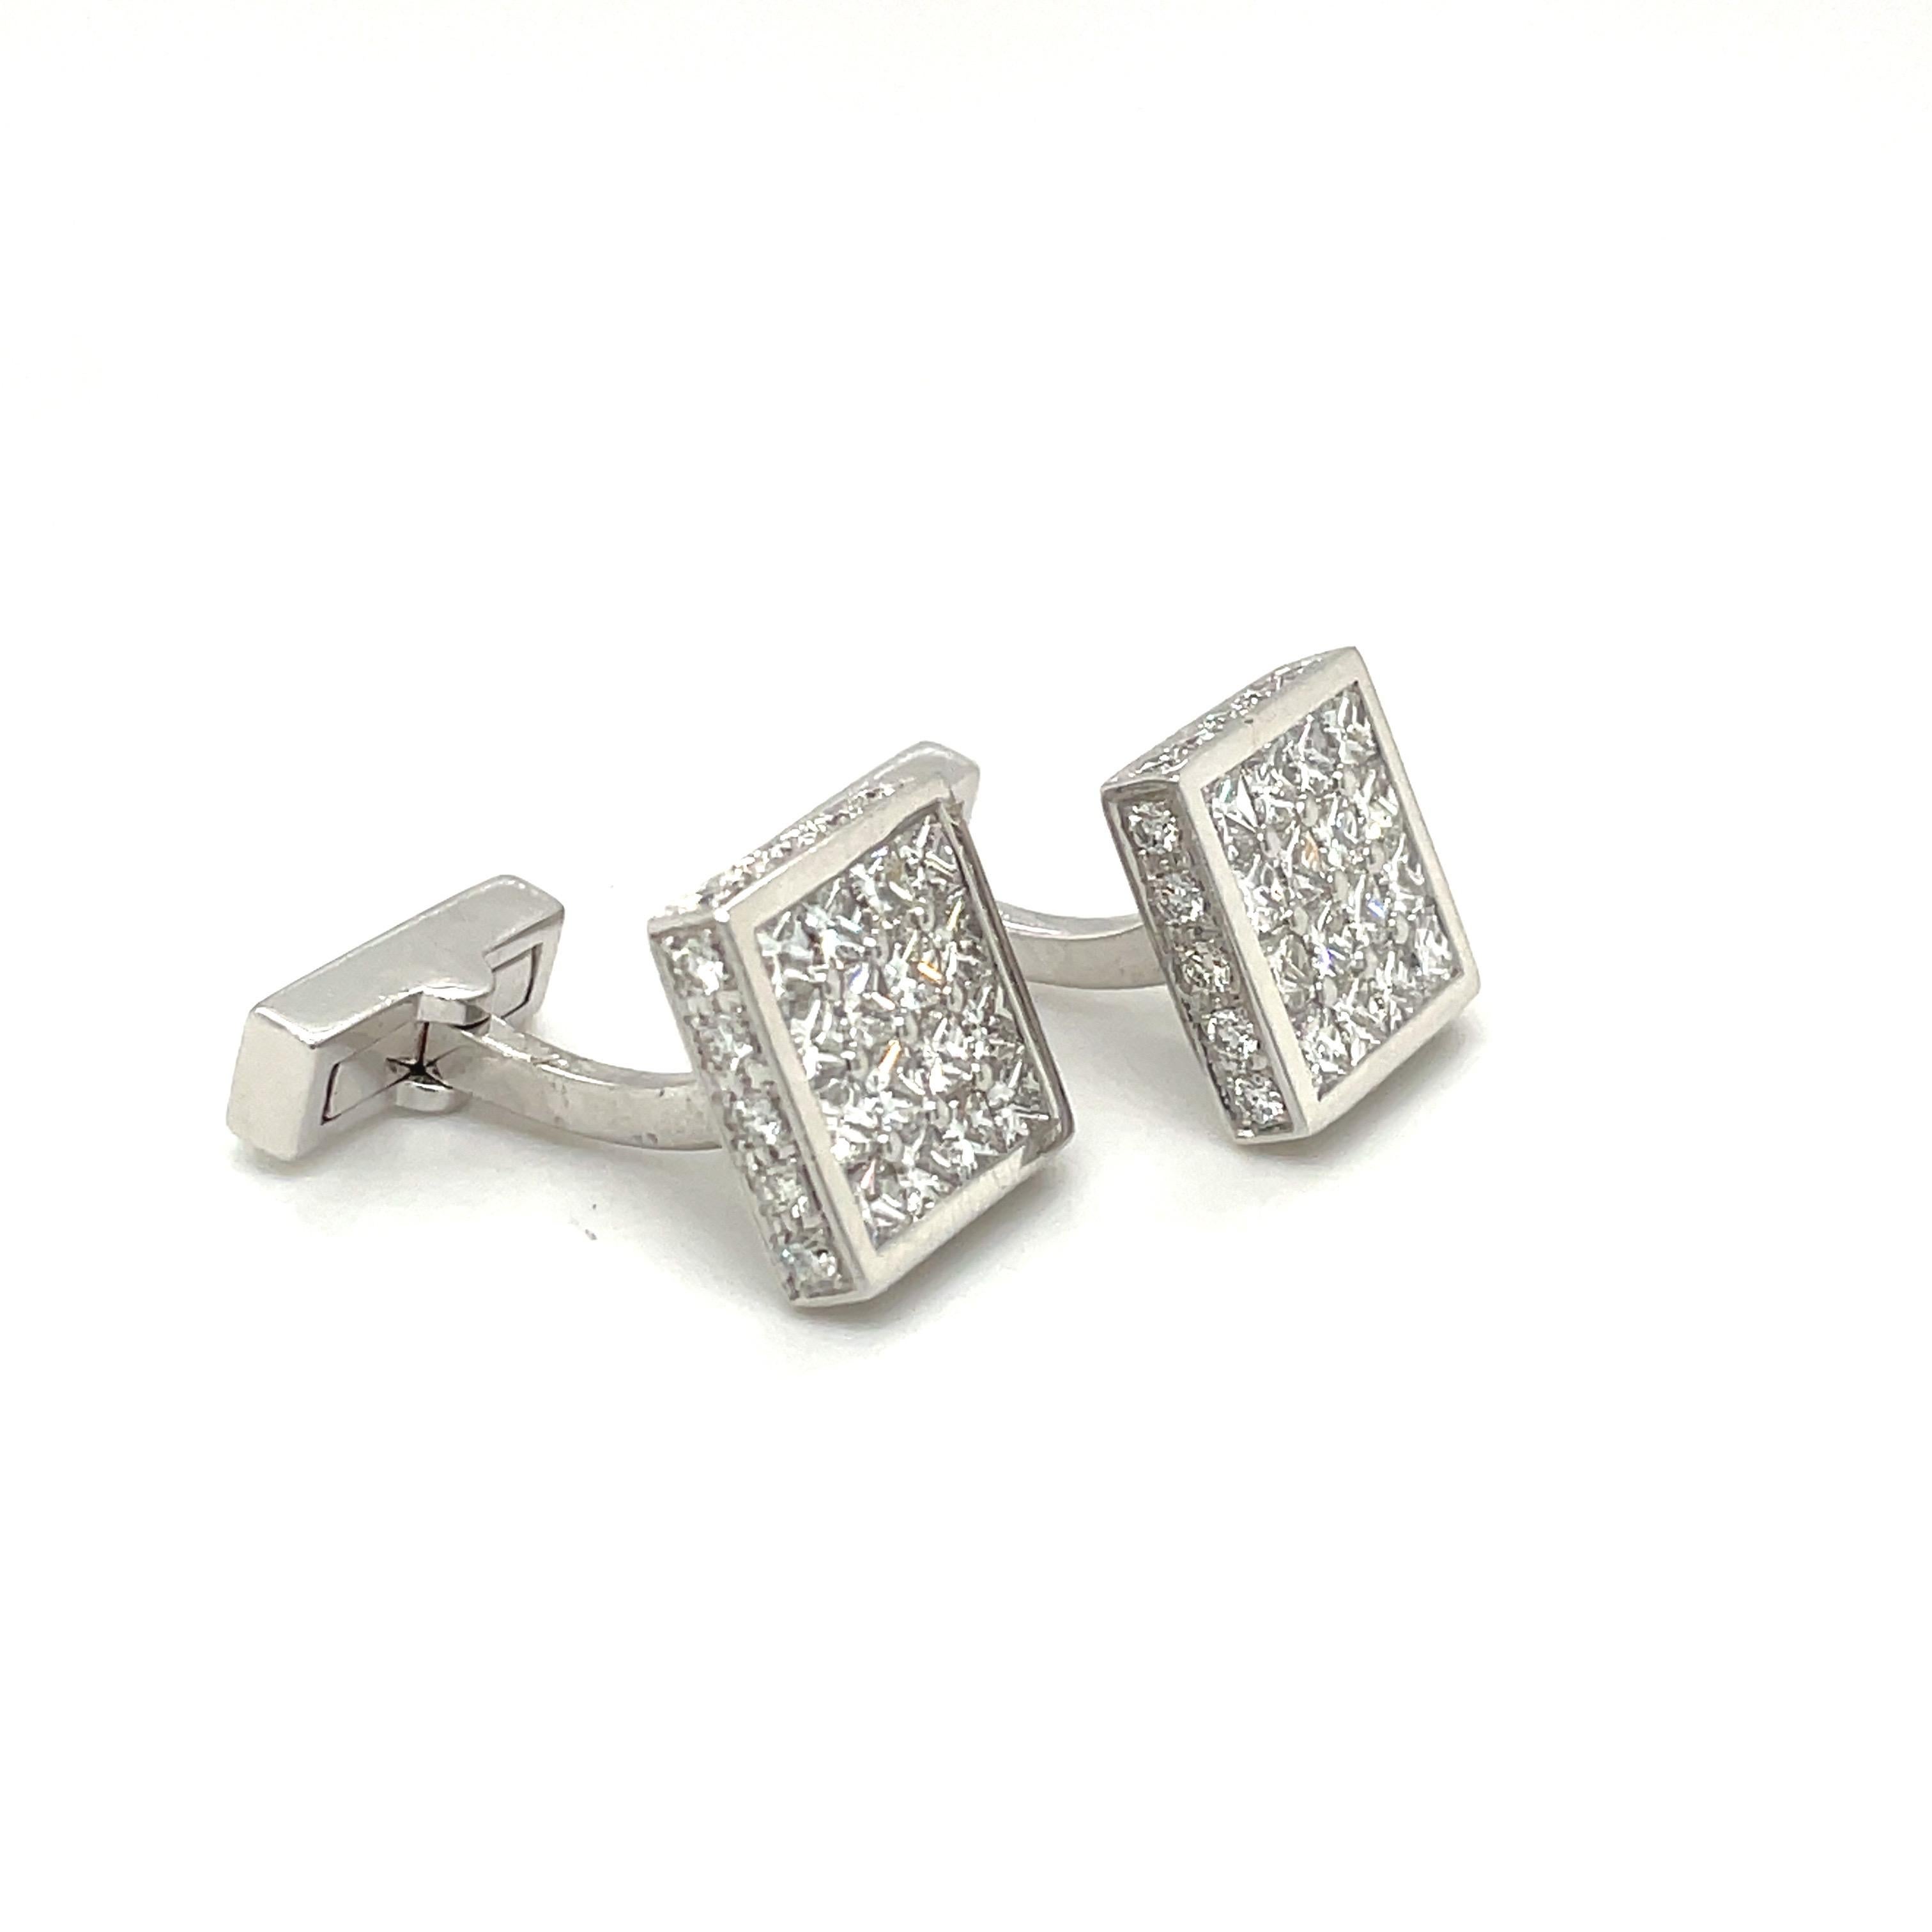 Magnificent pair of 18 karat white gold square diamond cuff links. The cuff links are invisibly set with princess cut diamonds. The entire border of the cuff links are set with round brilliant diamonds. The collapsible bar backs are also set with a